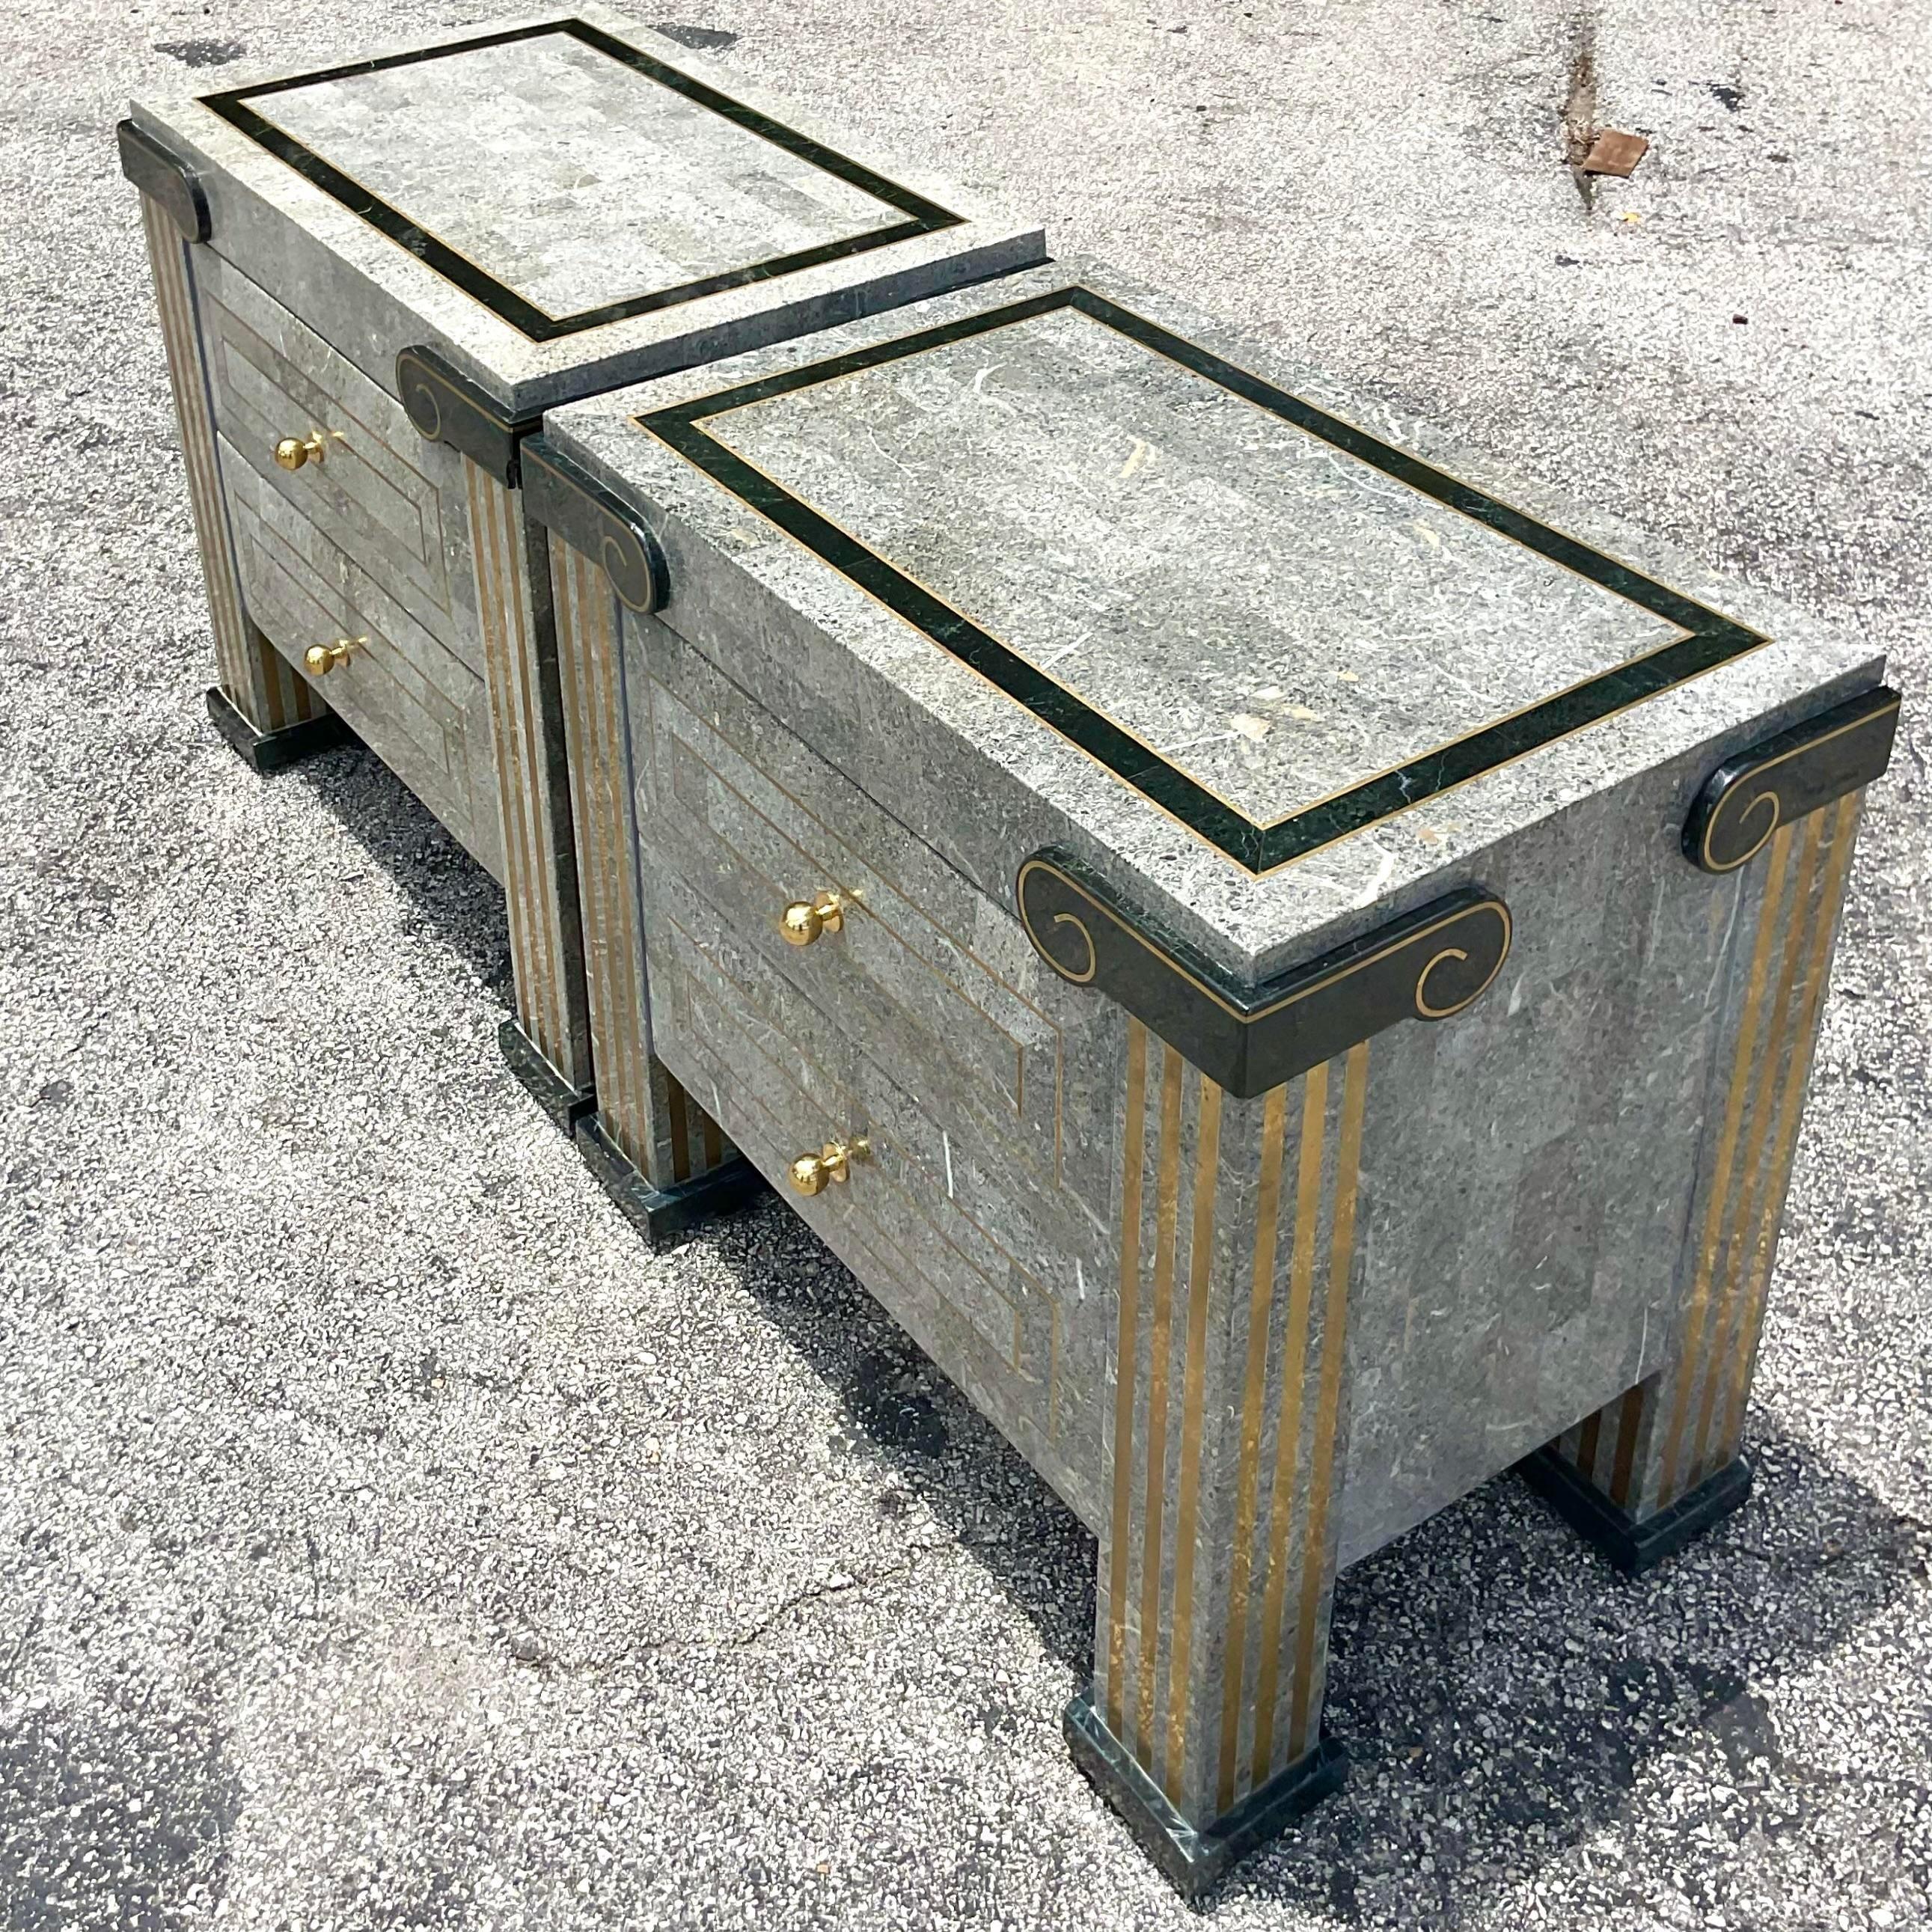 Introduce a touch of bohemian luxury to your bedroom with our Vintage Boho Tessellated Stone Nightstands inspired by Maitland Smith. Handcrafted in the USA, these nightstands epitomize American craftsmanship, blending eclectic boho style with the